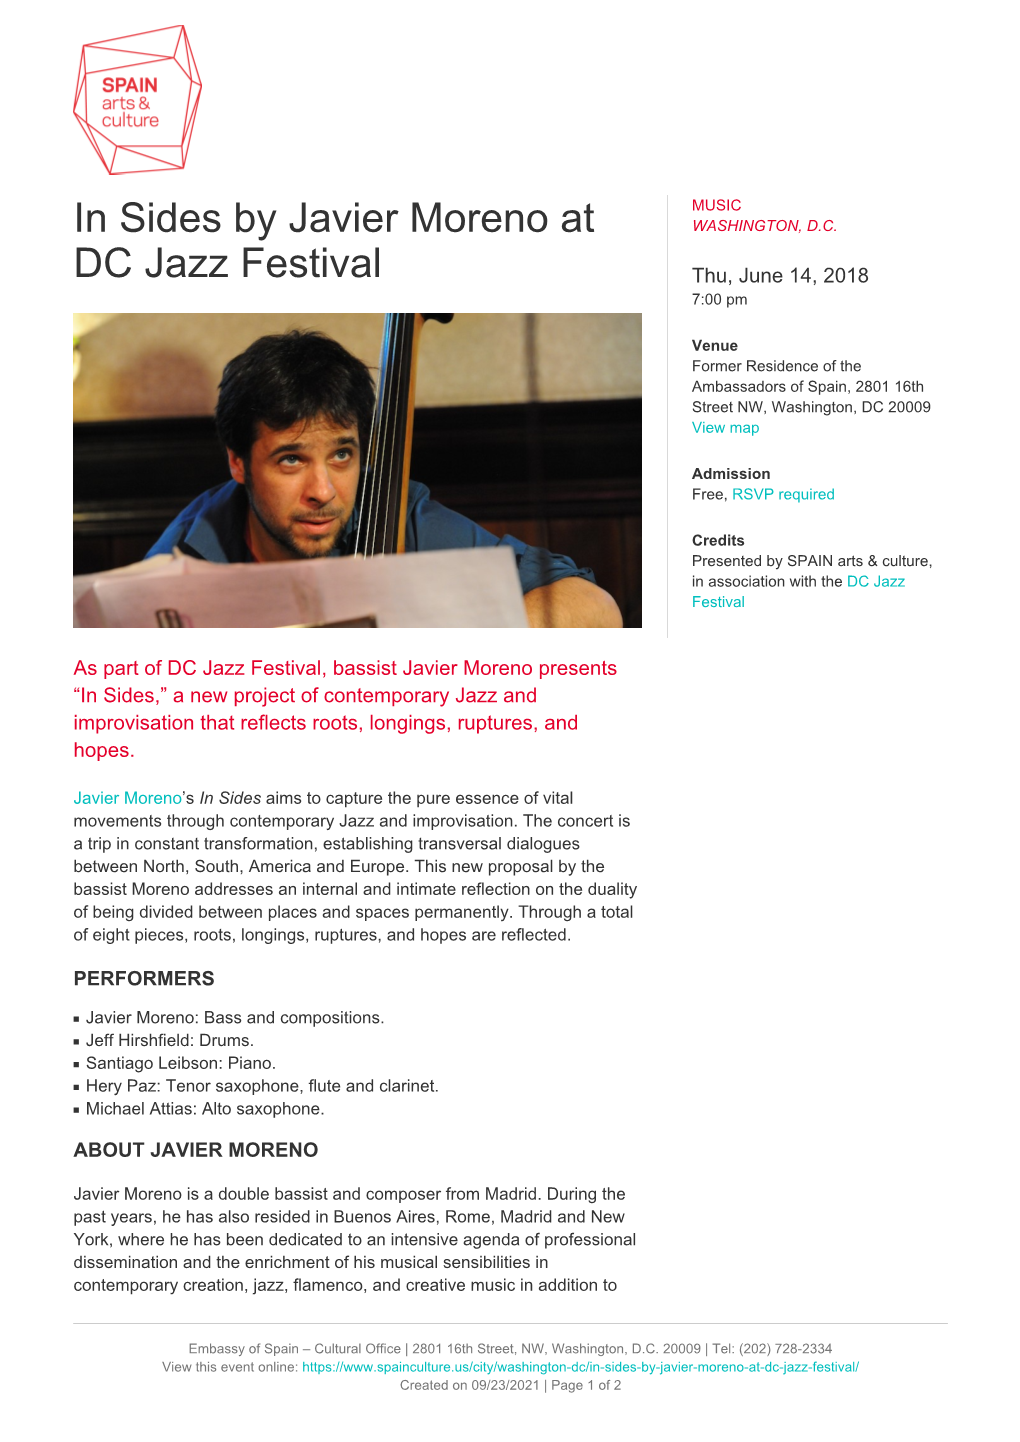 In Sides by Javier Moreno at DC Jazz Festival